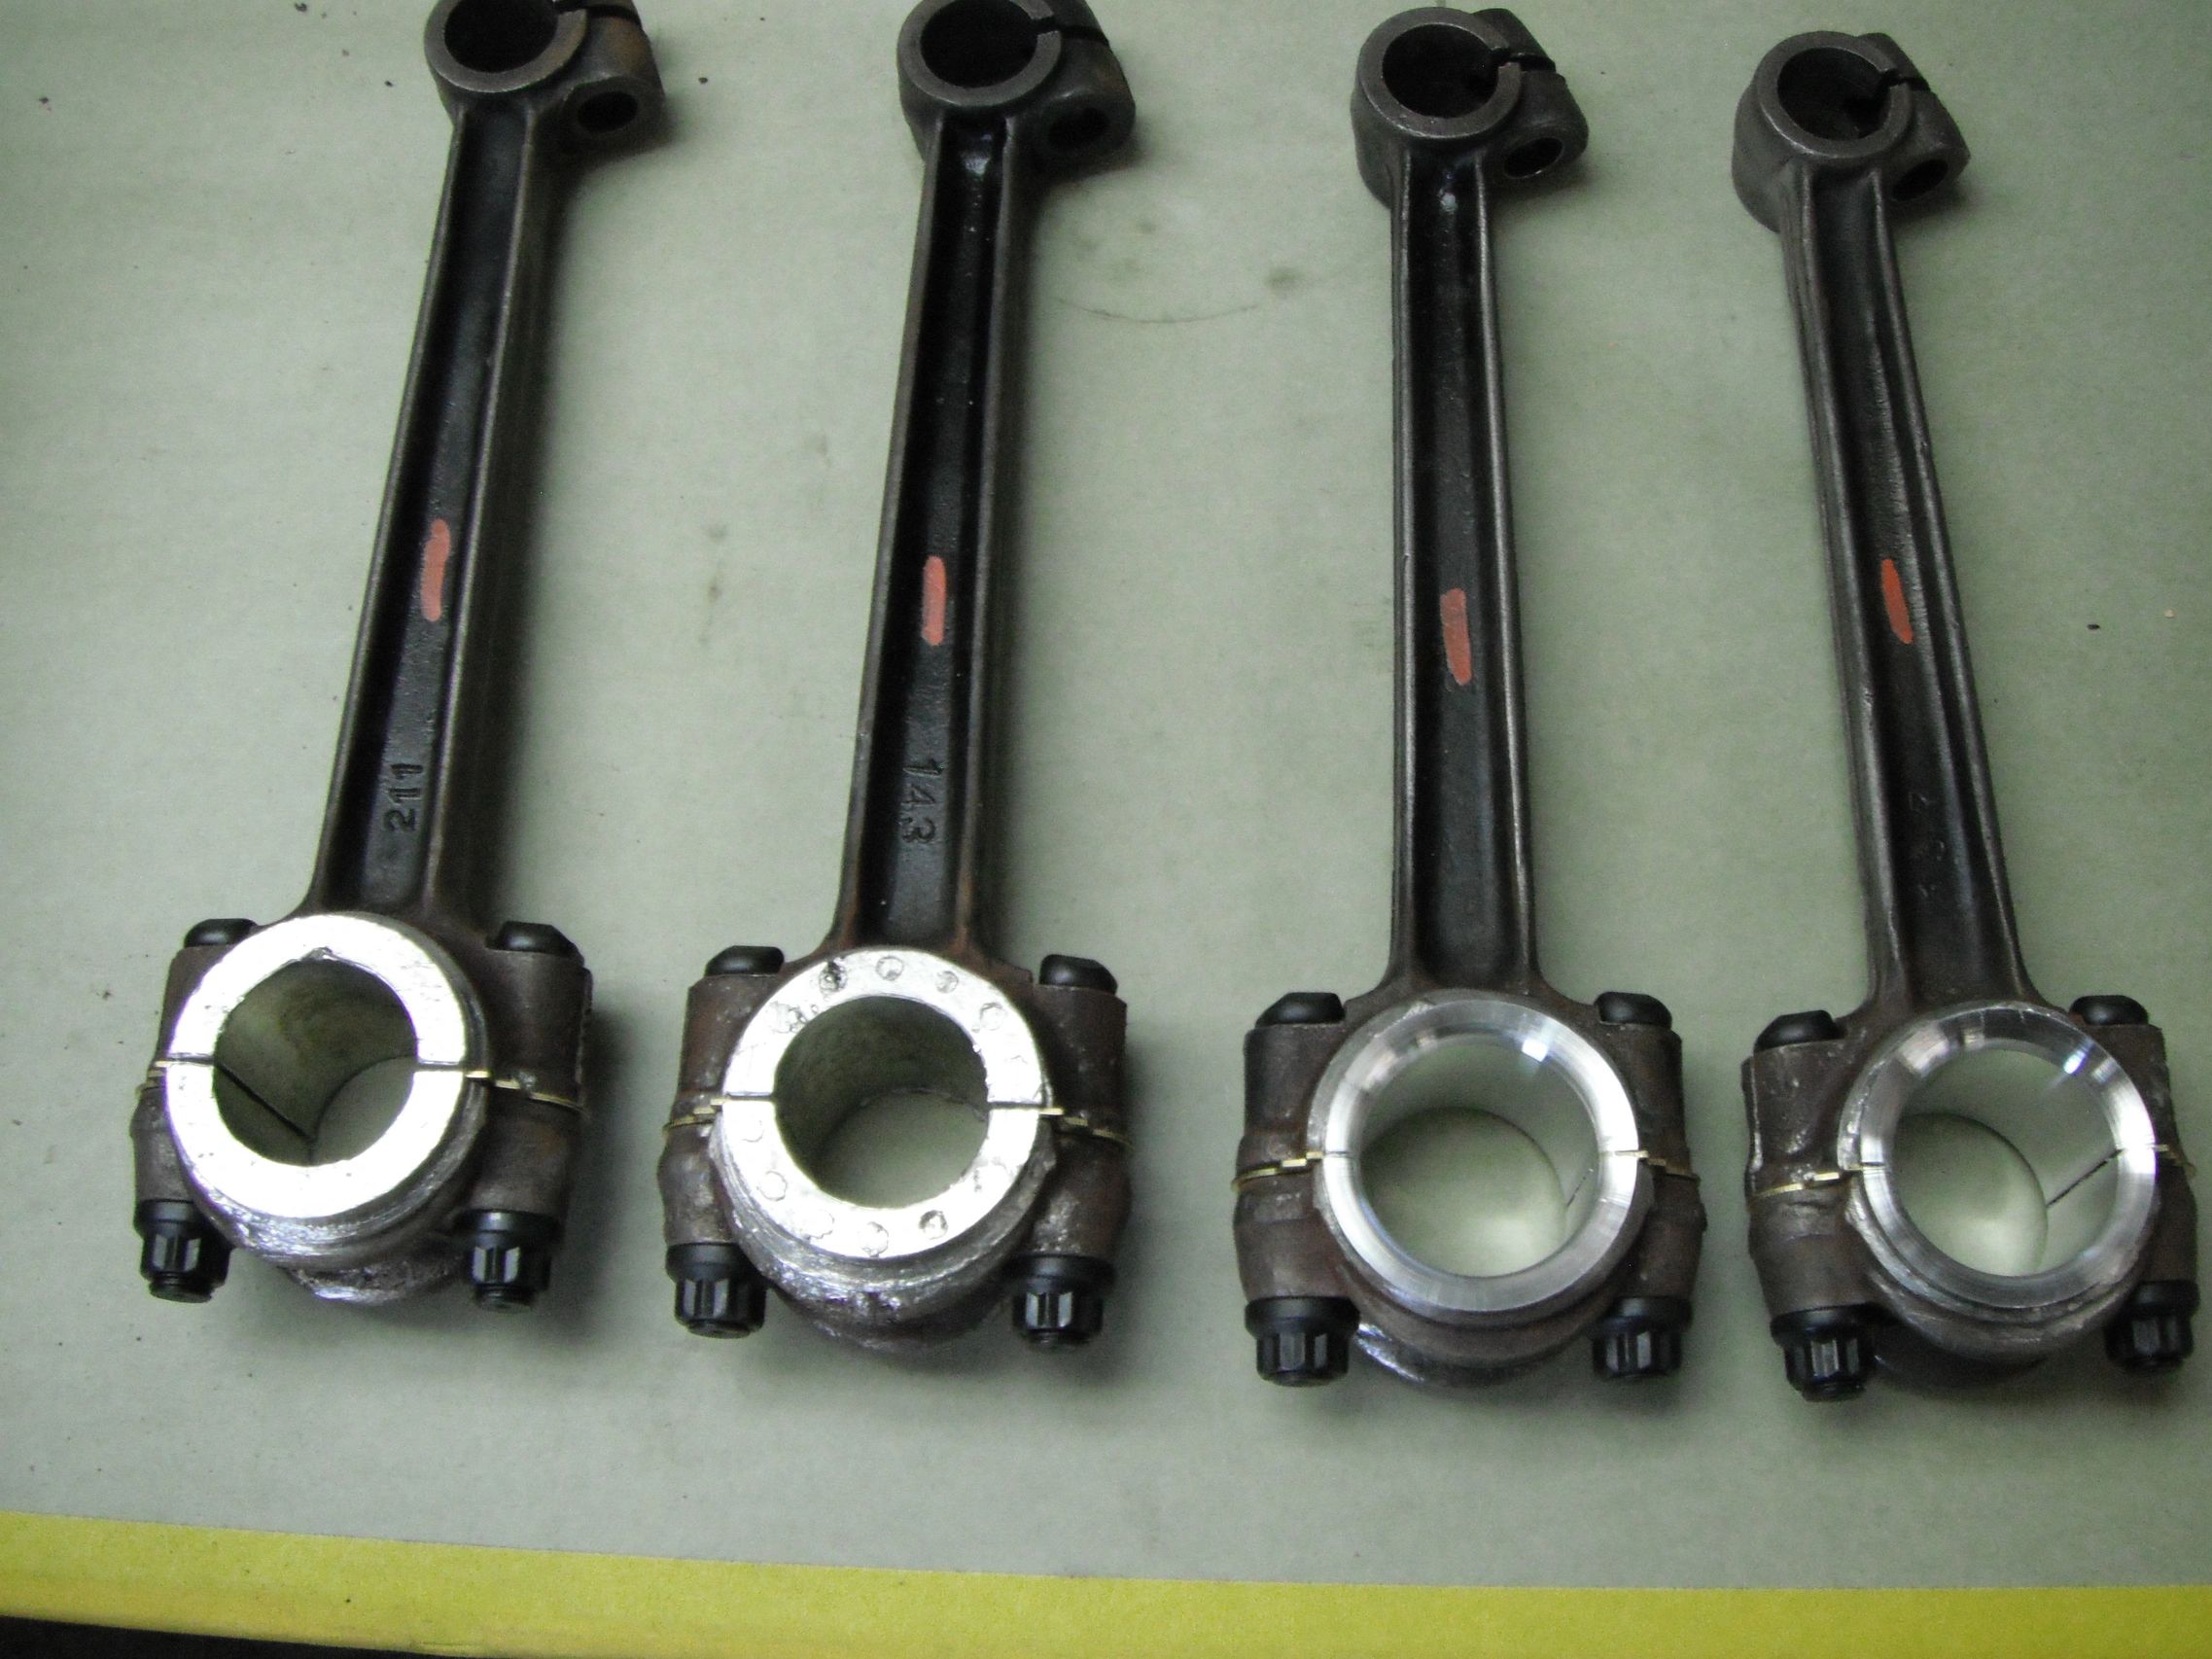 Model T Ford Engine Connecting Rods with 4X Nickle Babbitt in various stages of finish.